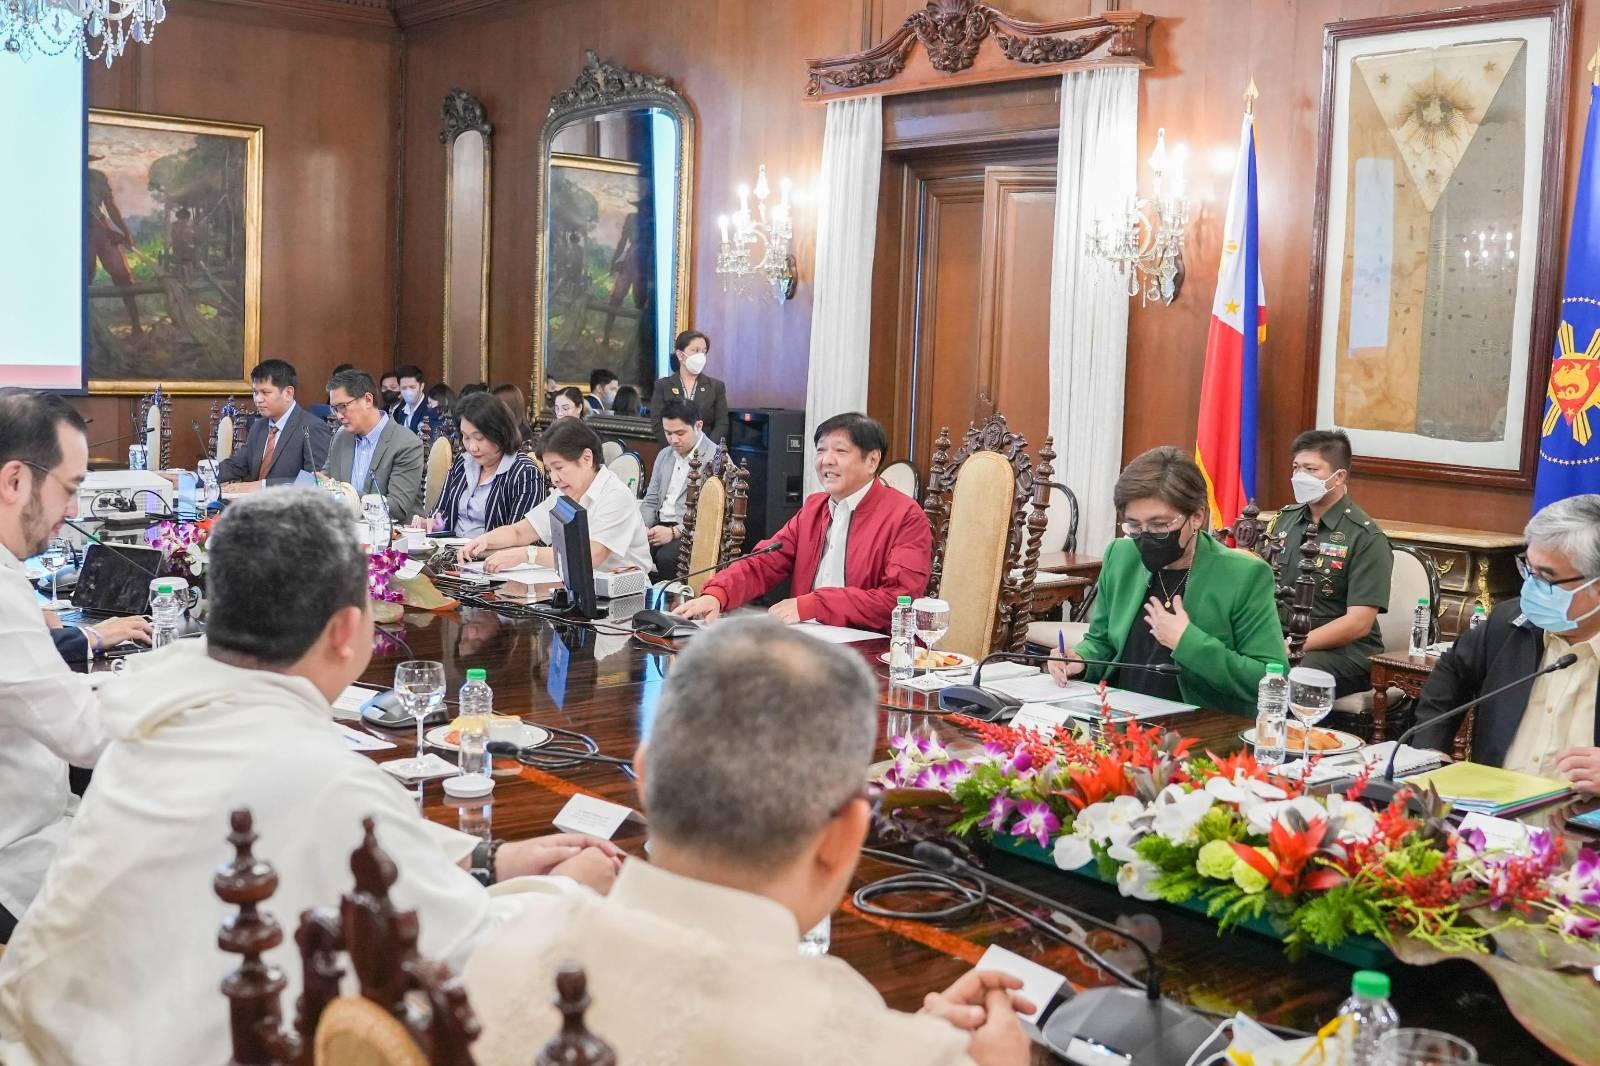 Marcos meeting with Private Sector Advisory Council (PSAC) Health Sector Group